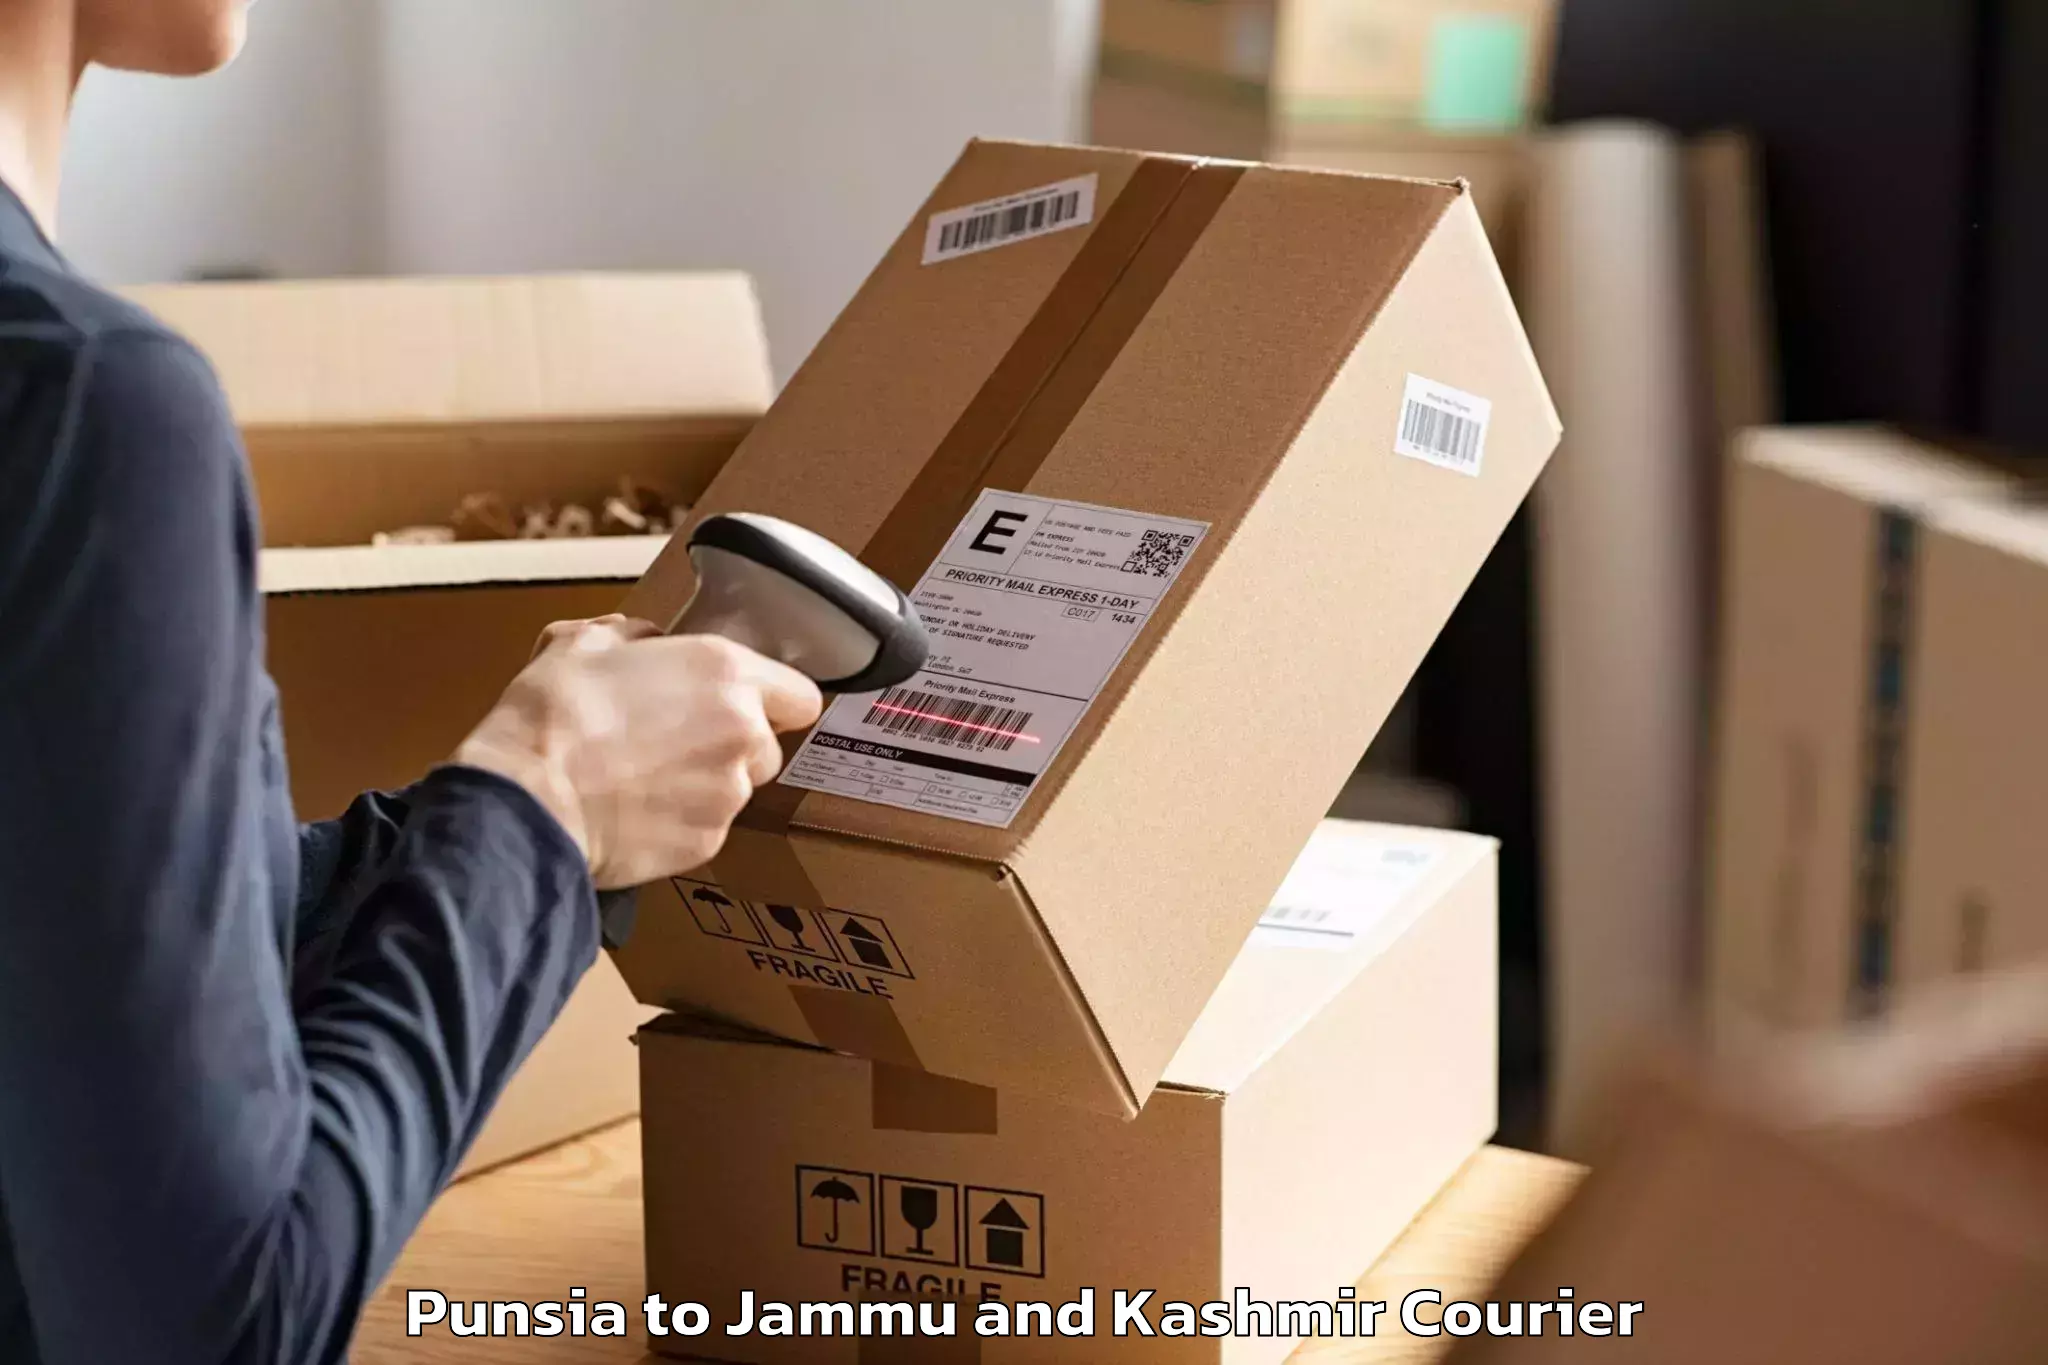 Professional moving company Punsia to Udhampur